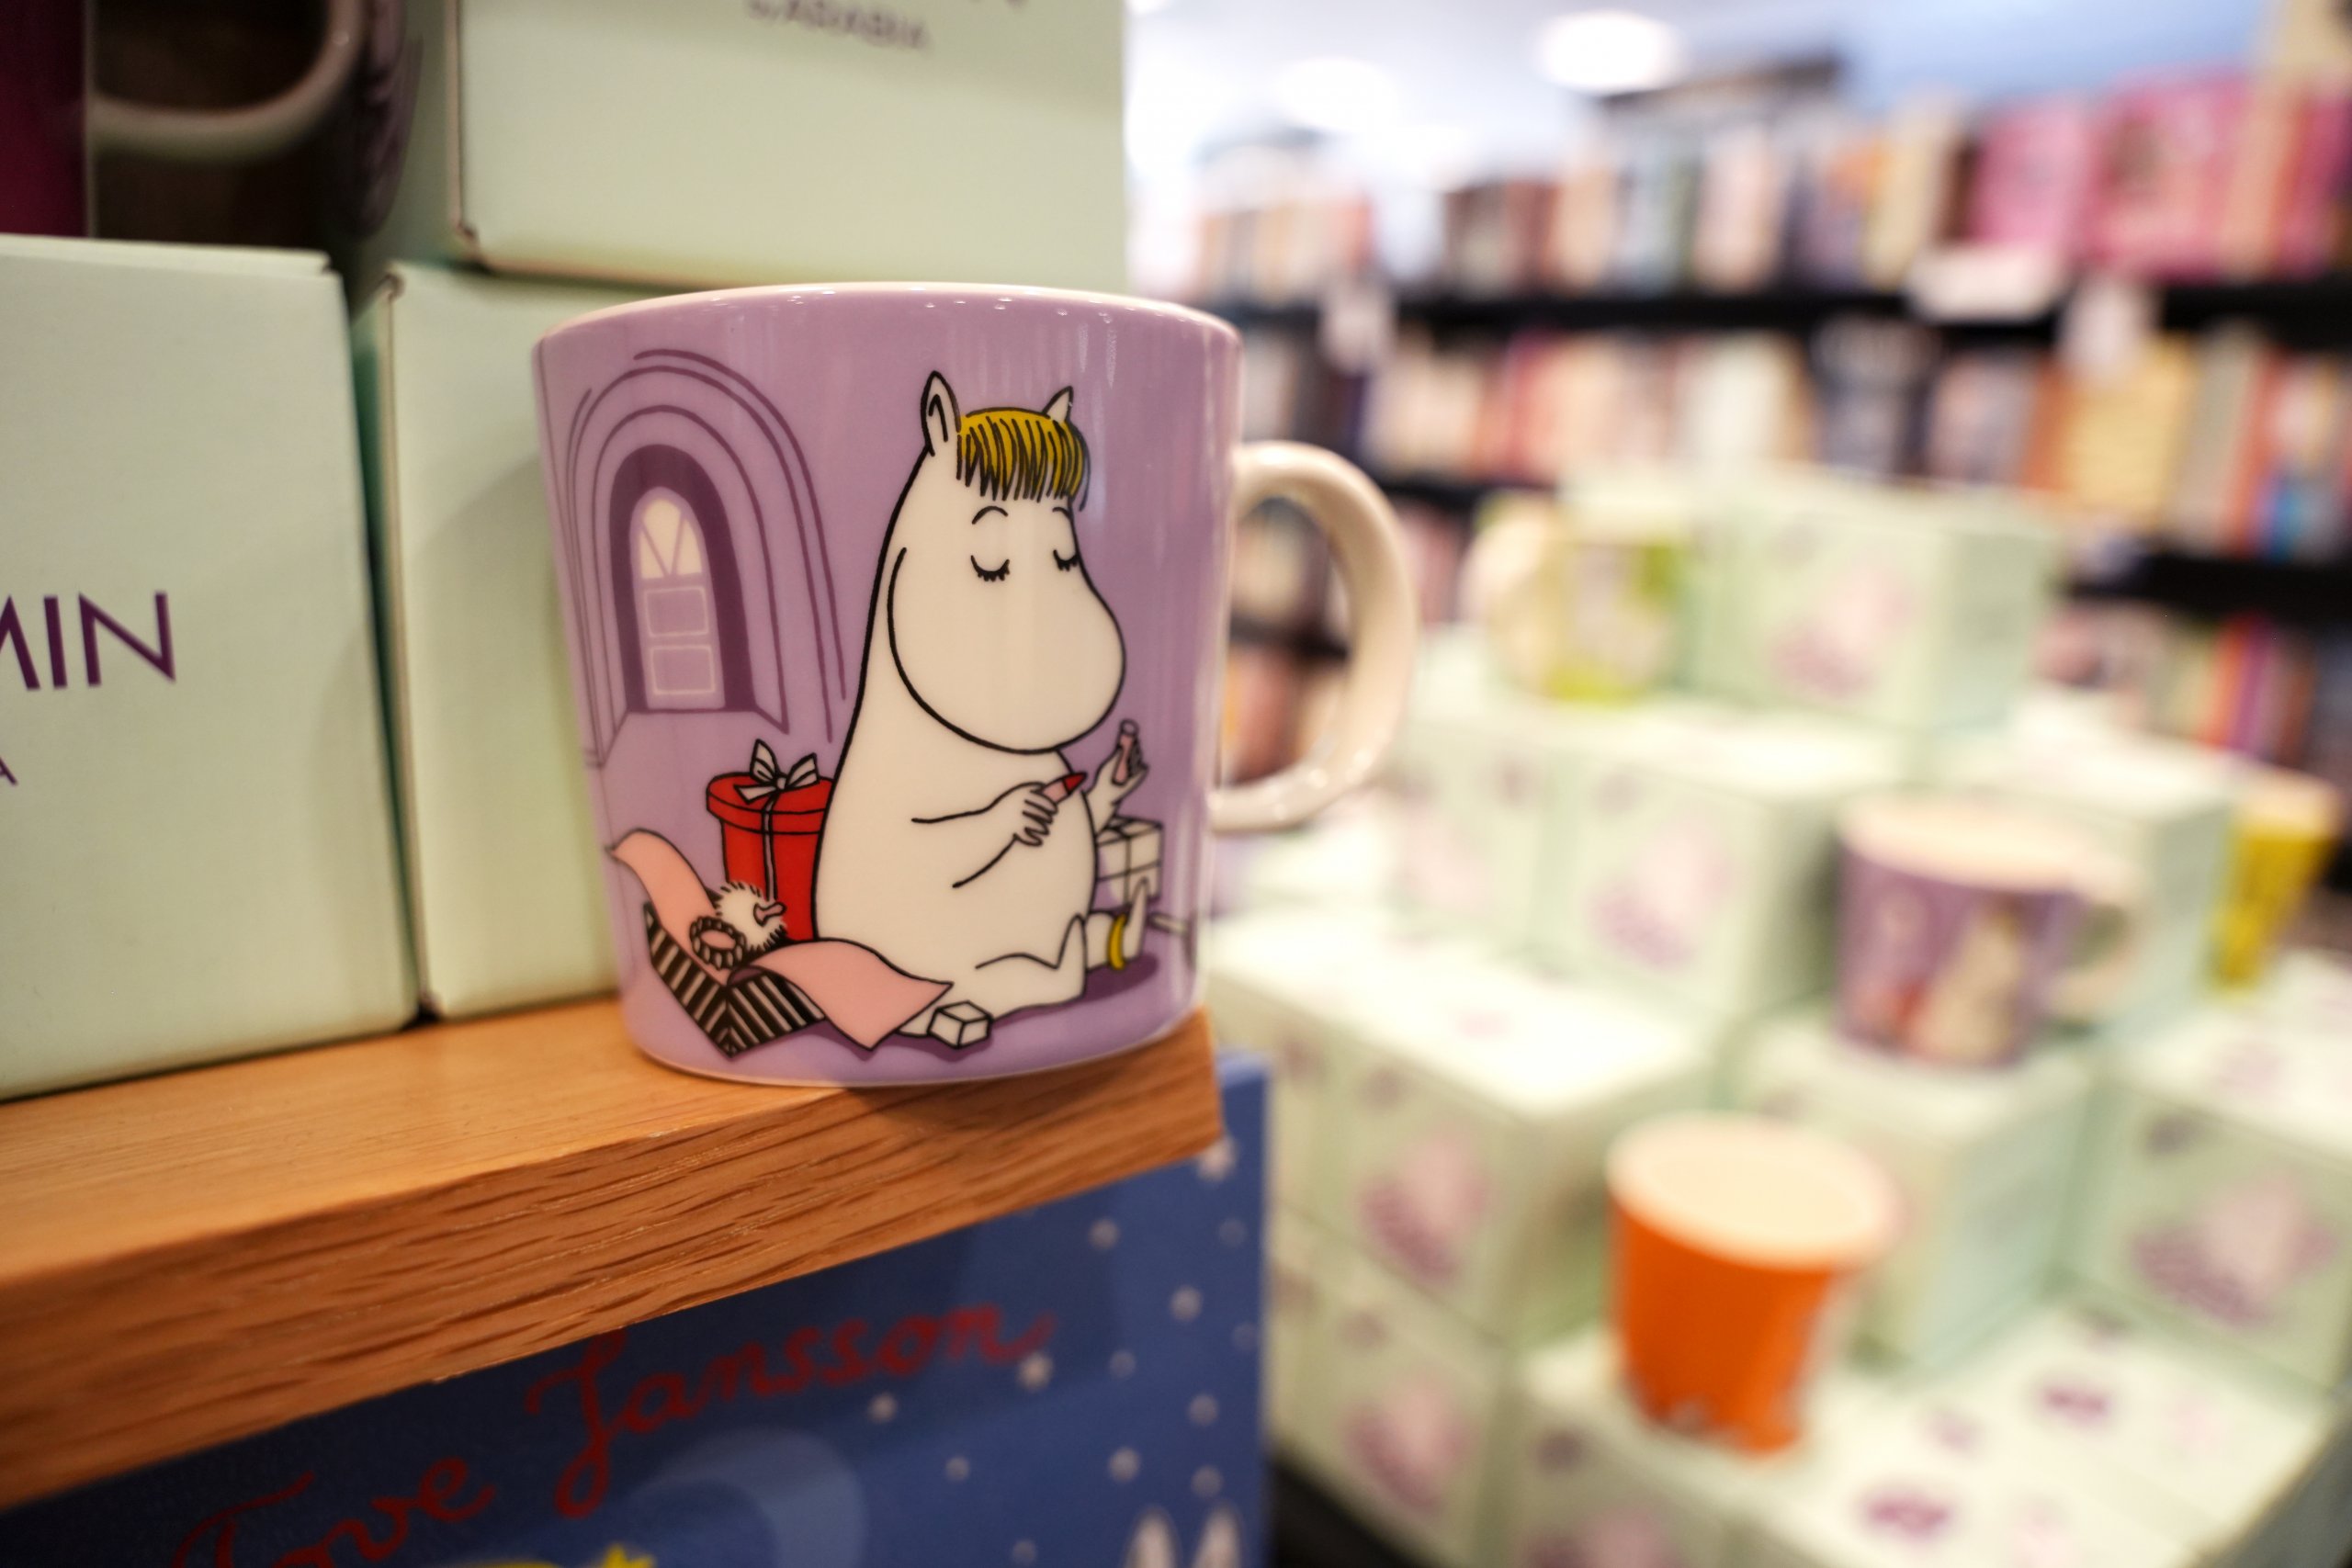 Barnes & Noble brings Moomin to the United States